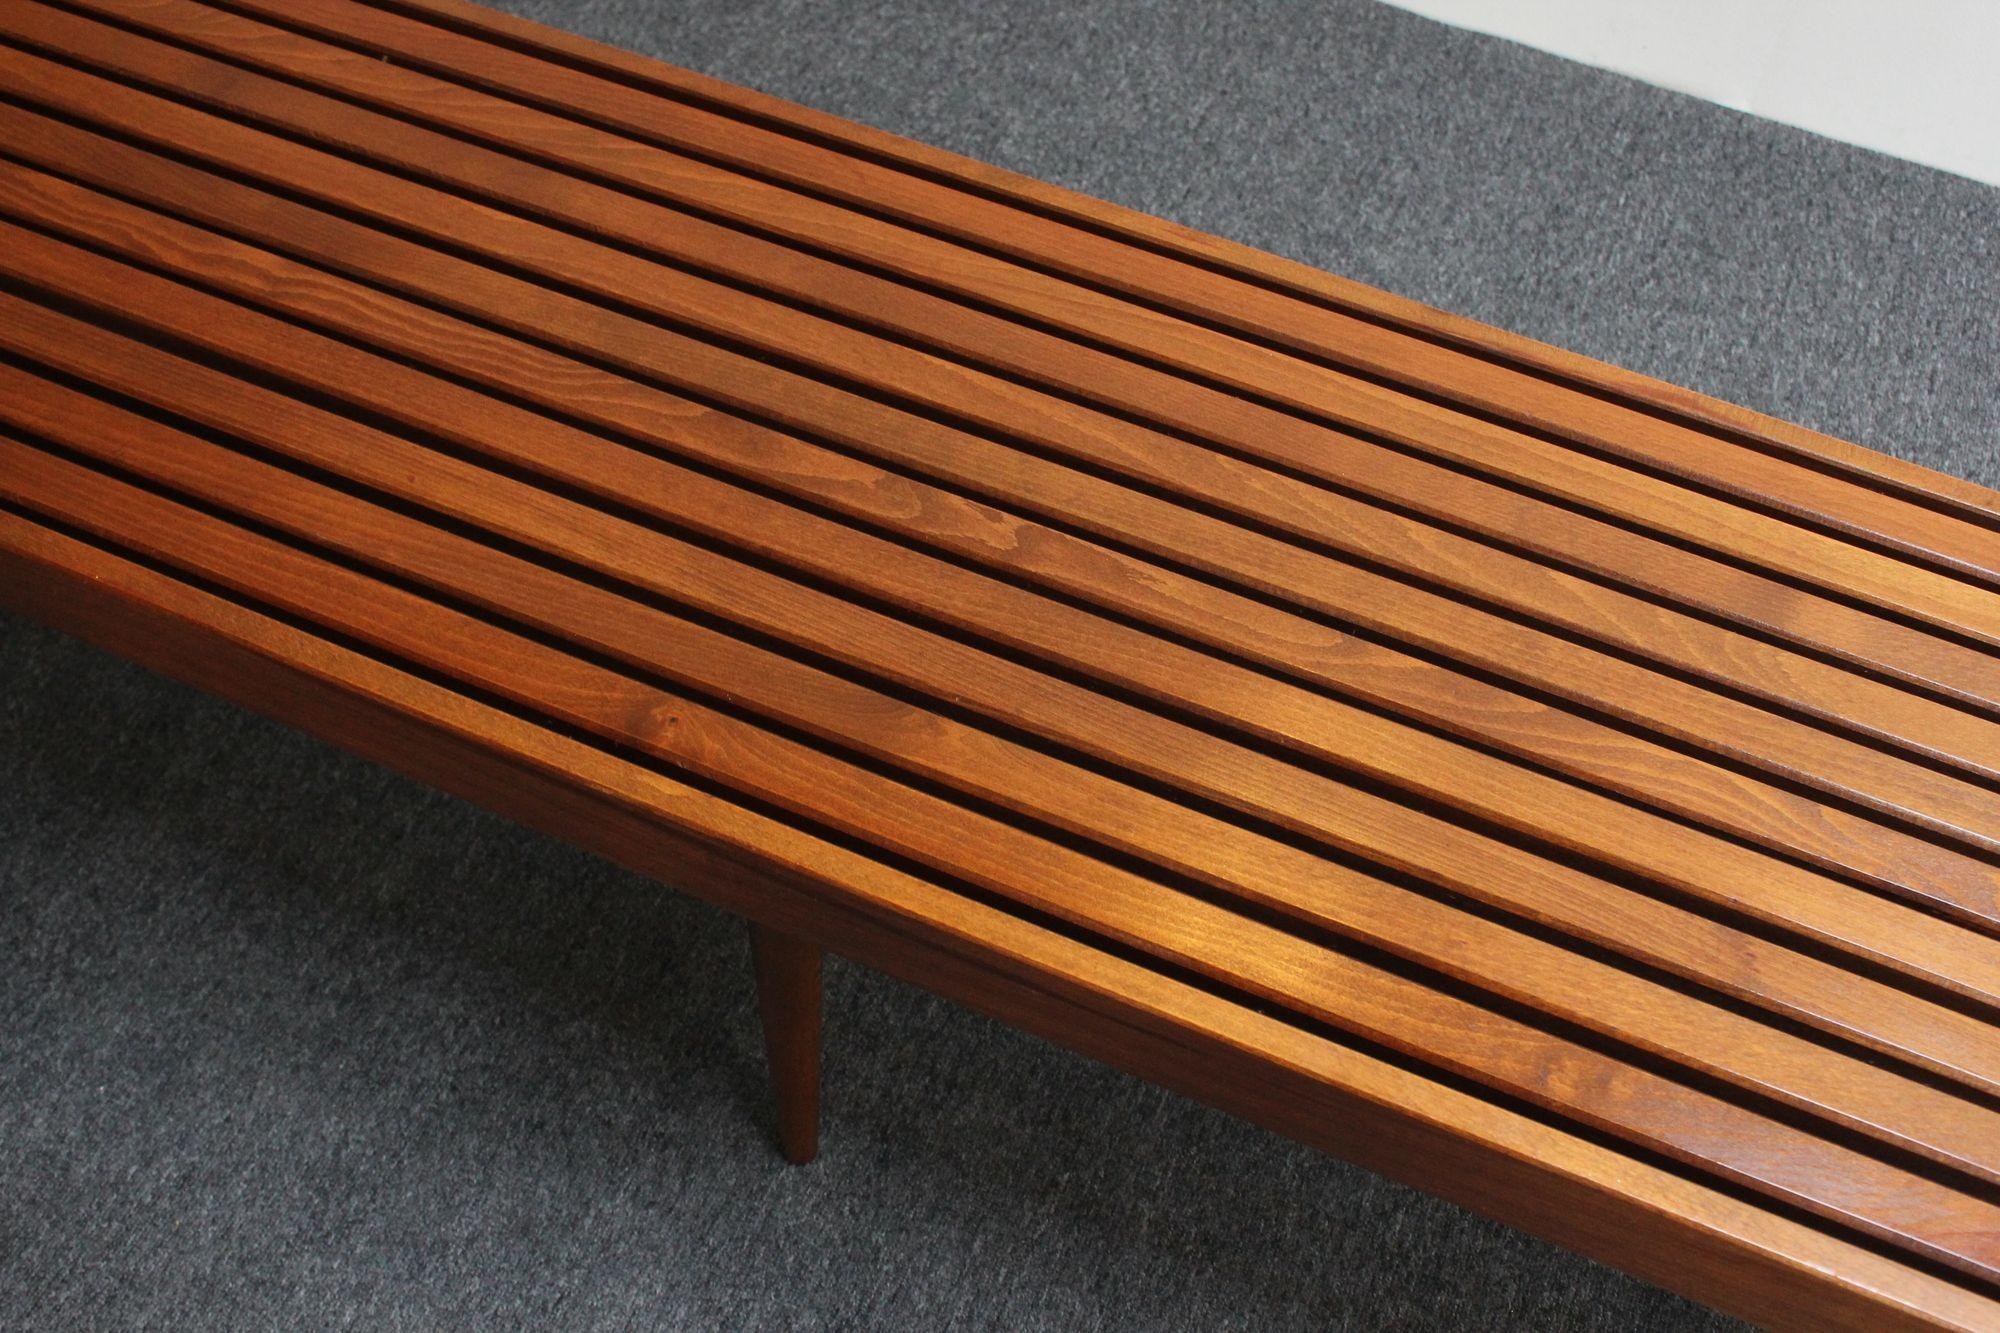 Long Mid-Century Modern Walnut Slatted Bench / Coffee Table with Tapered Legs For Sale 4